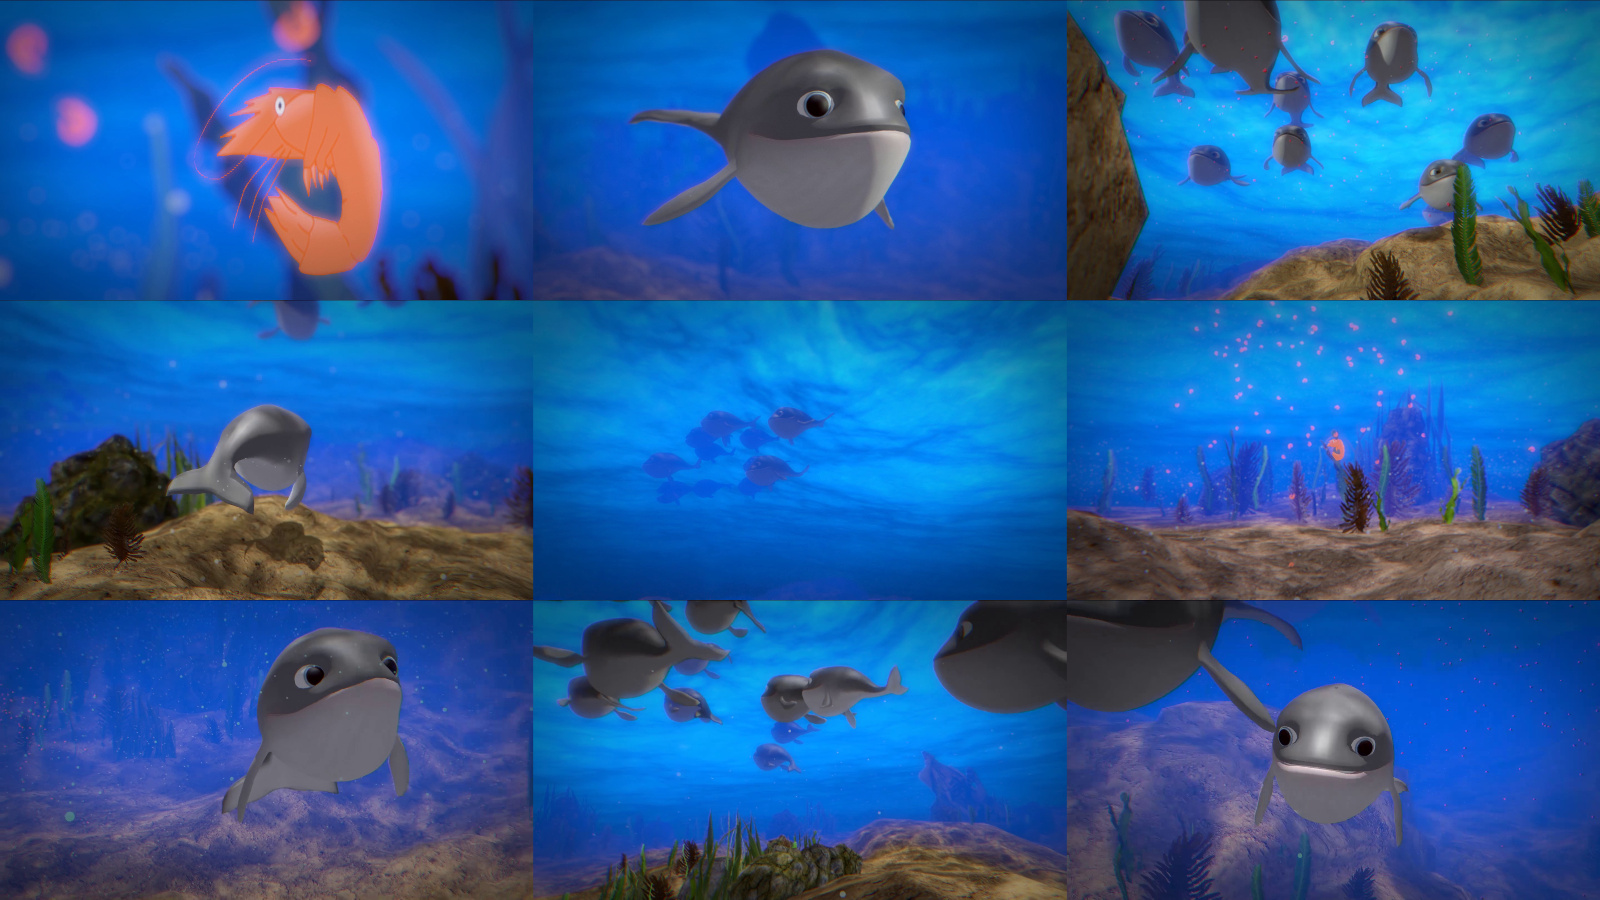 Sample of an animated series episode with Shark 3D, created like playing a game